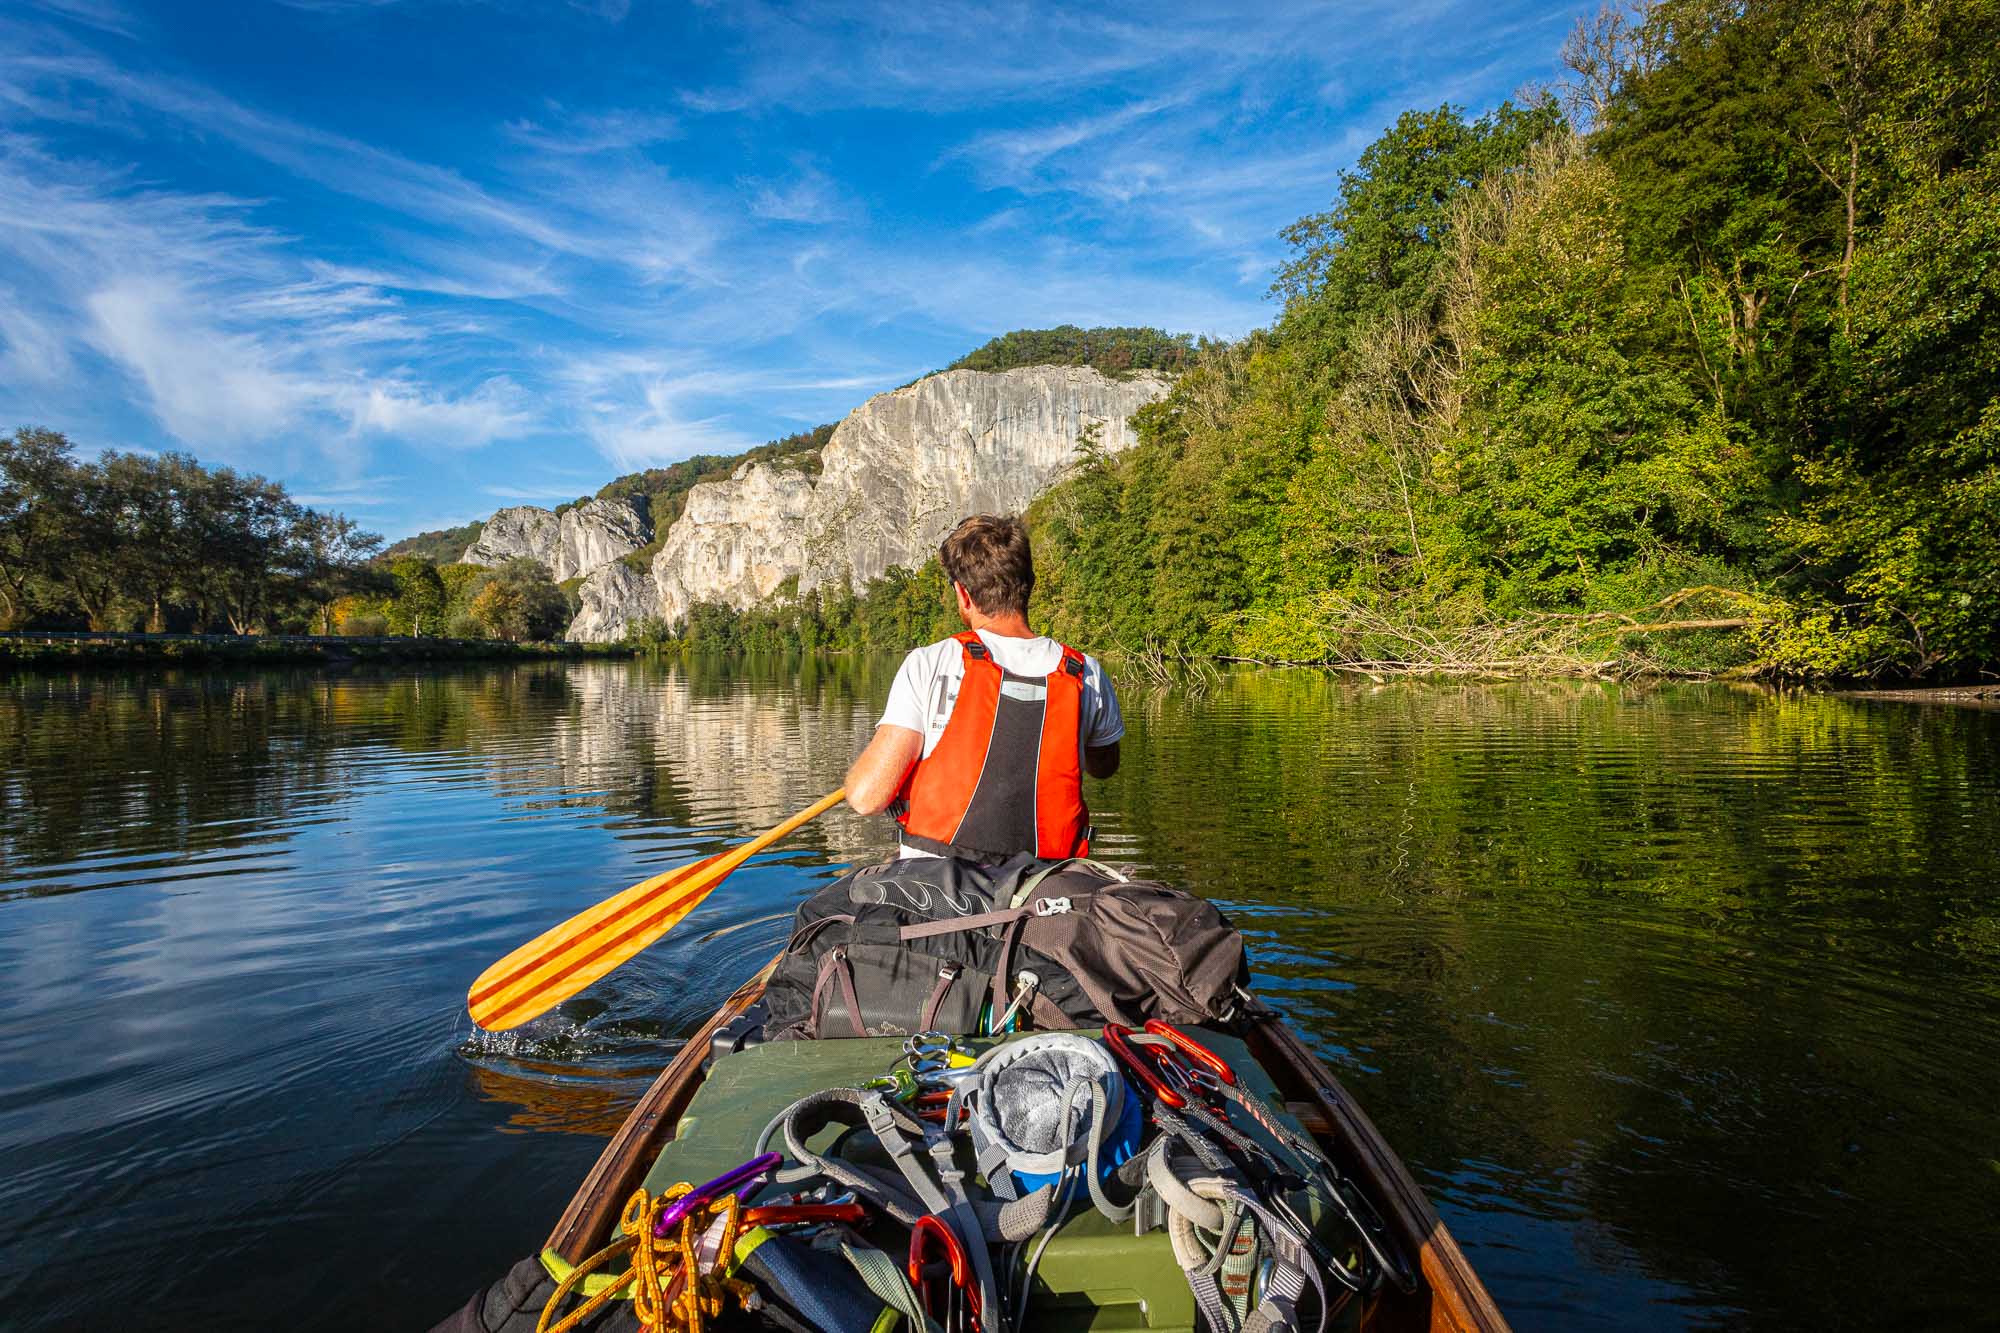 Mastering the art of canoeing on the Meuse River